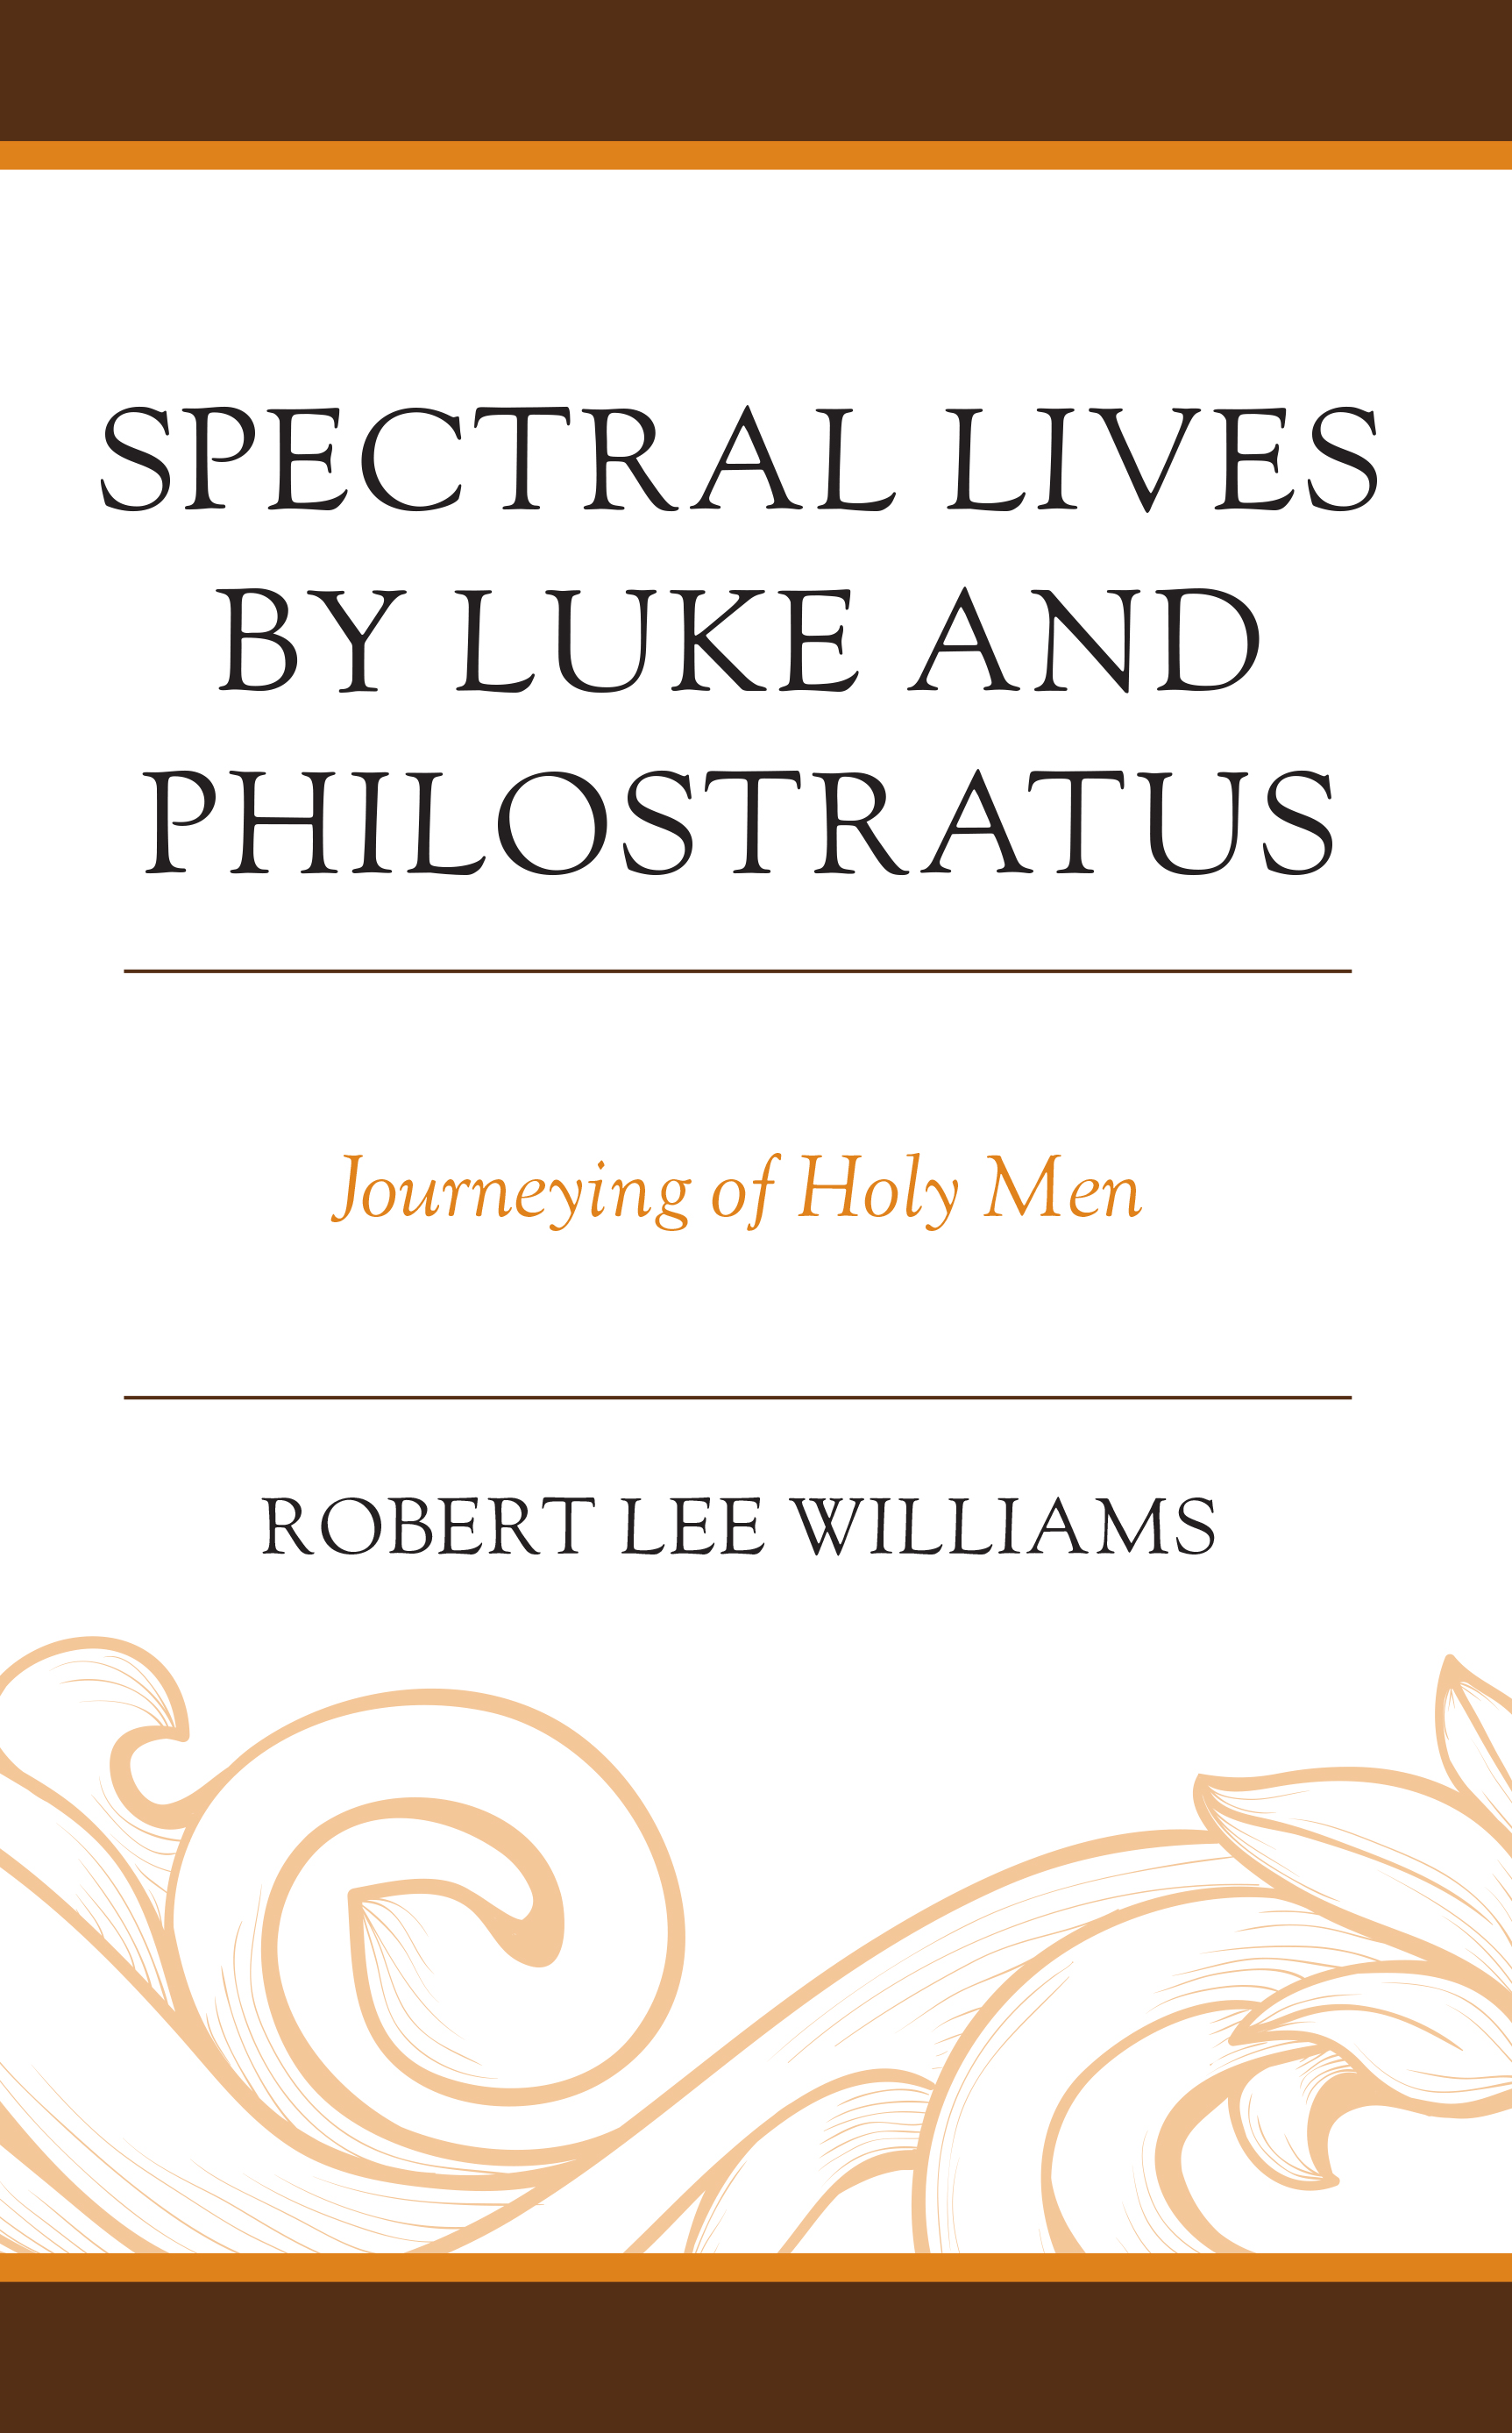 Spectral Lives by Luke and Philostratus: Journeying of Holy Men